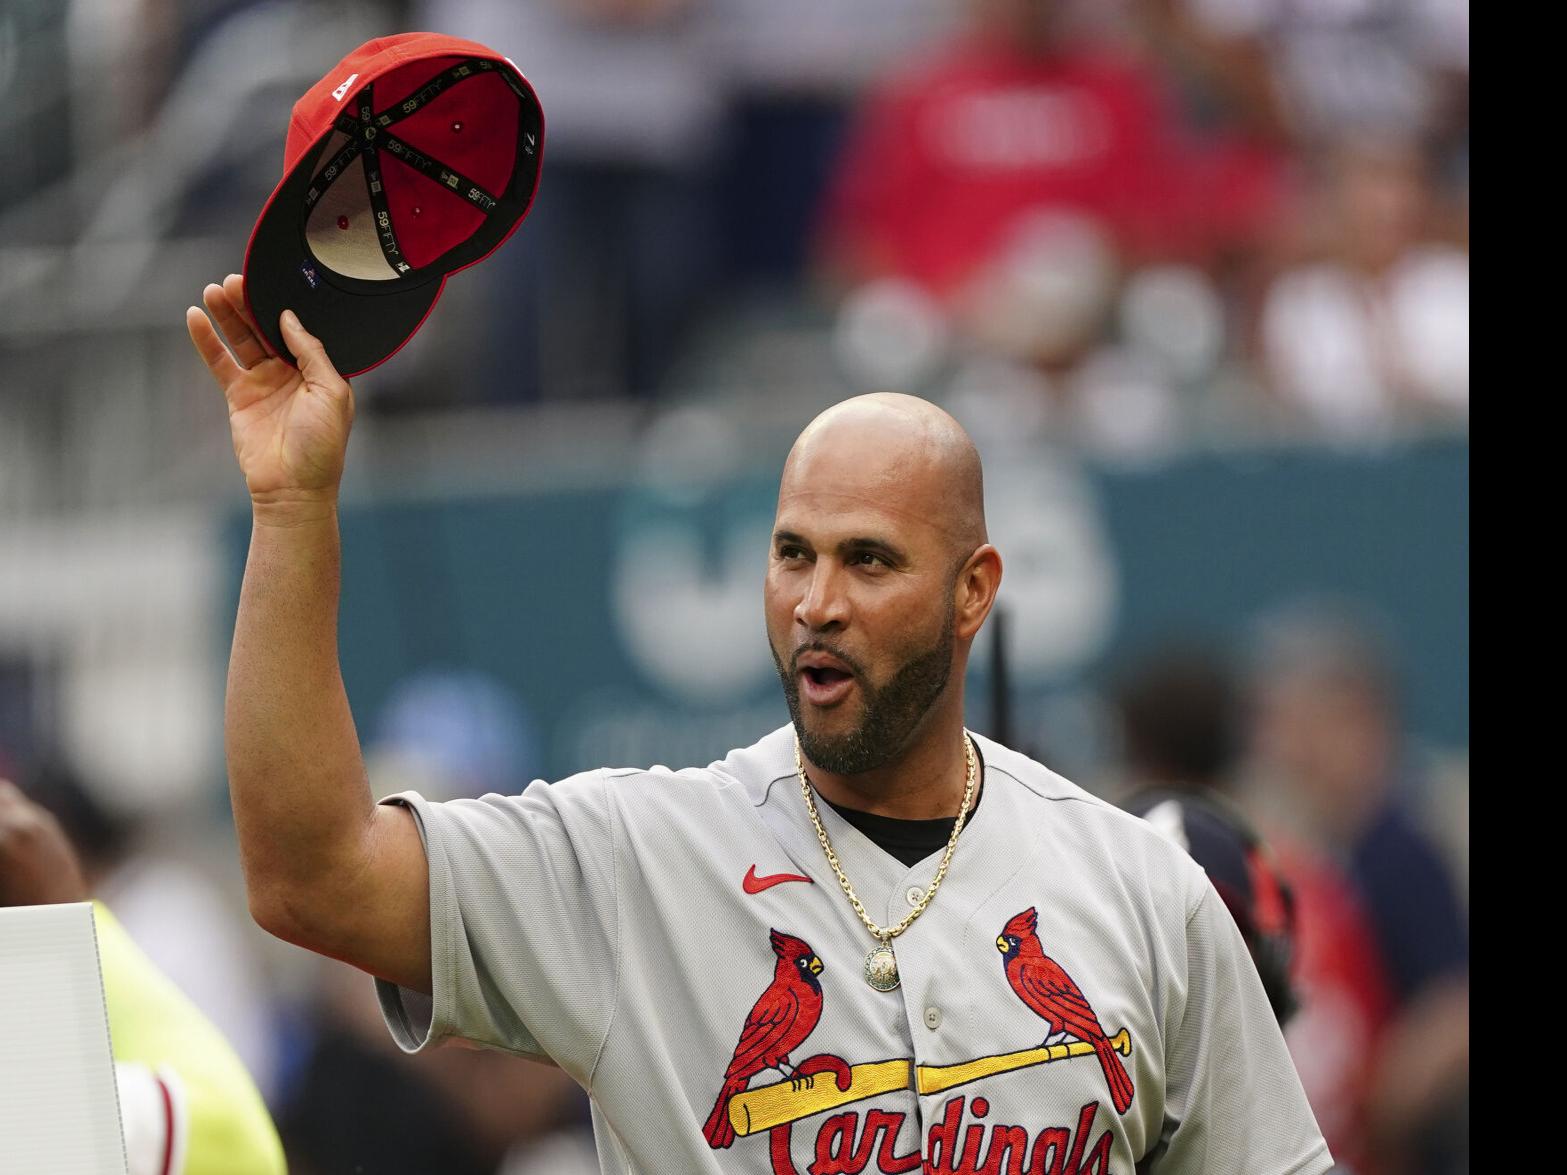 Pujols, Alonso, Acuna to compete in 2022 Home Run Derby